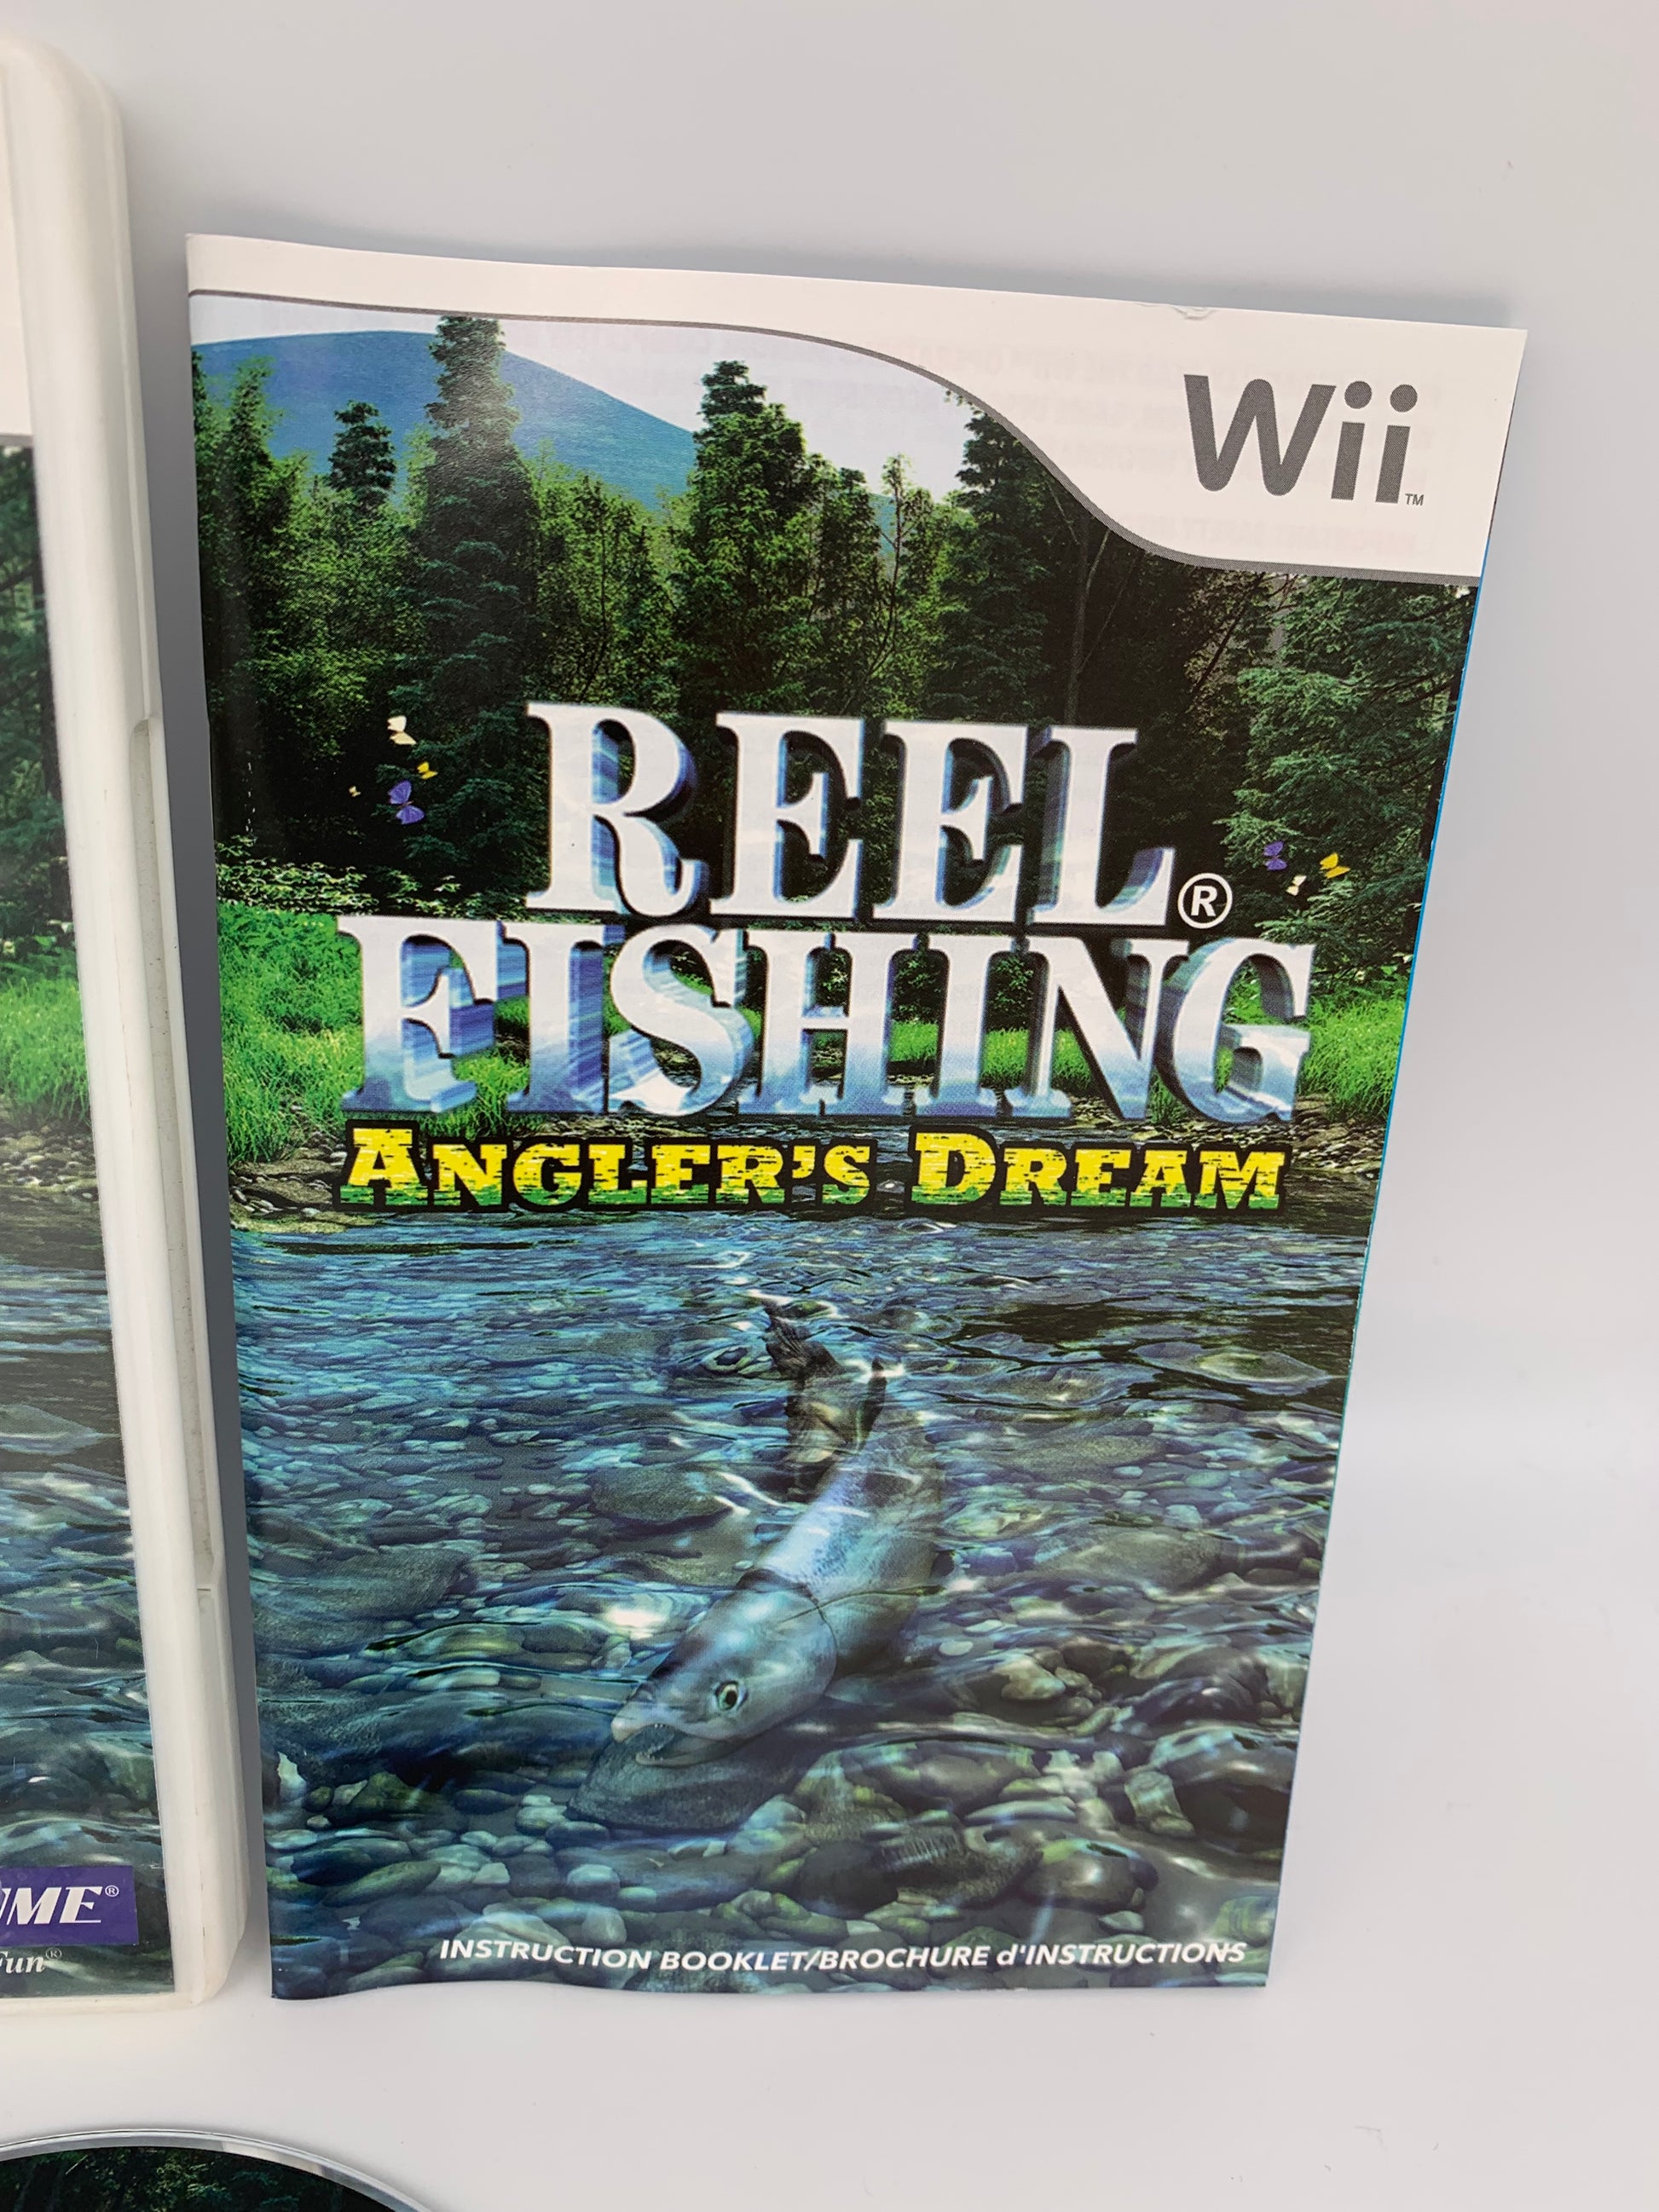 Reel Fishing Anglers Dream Wii - This N That